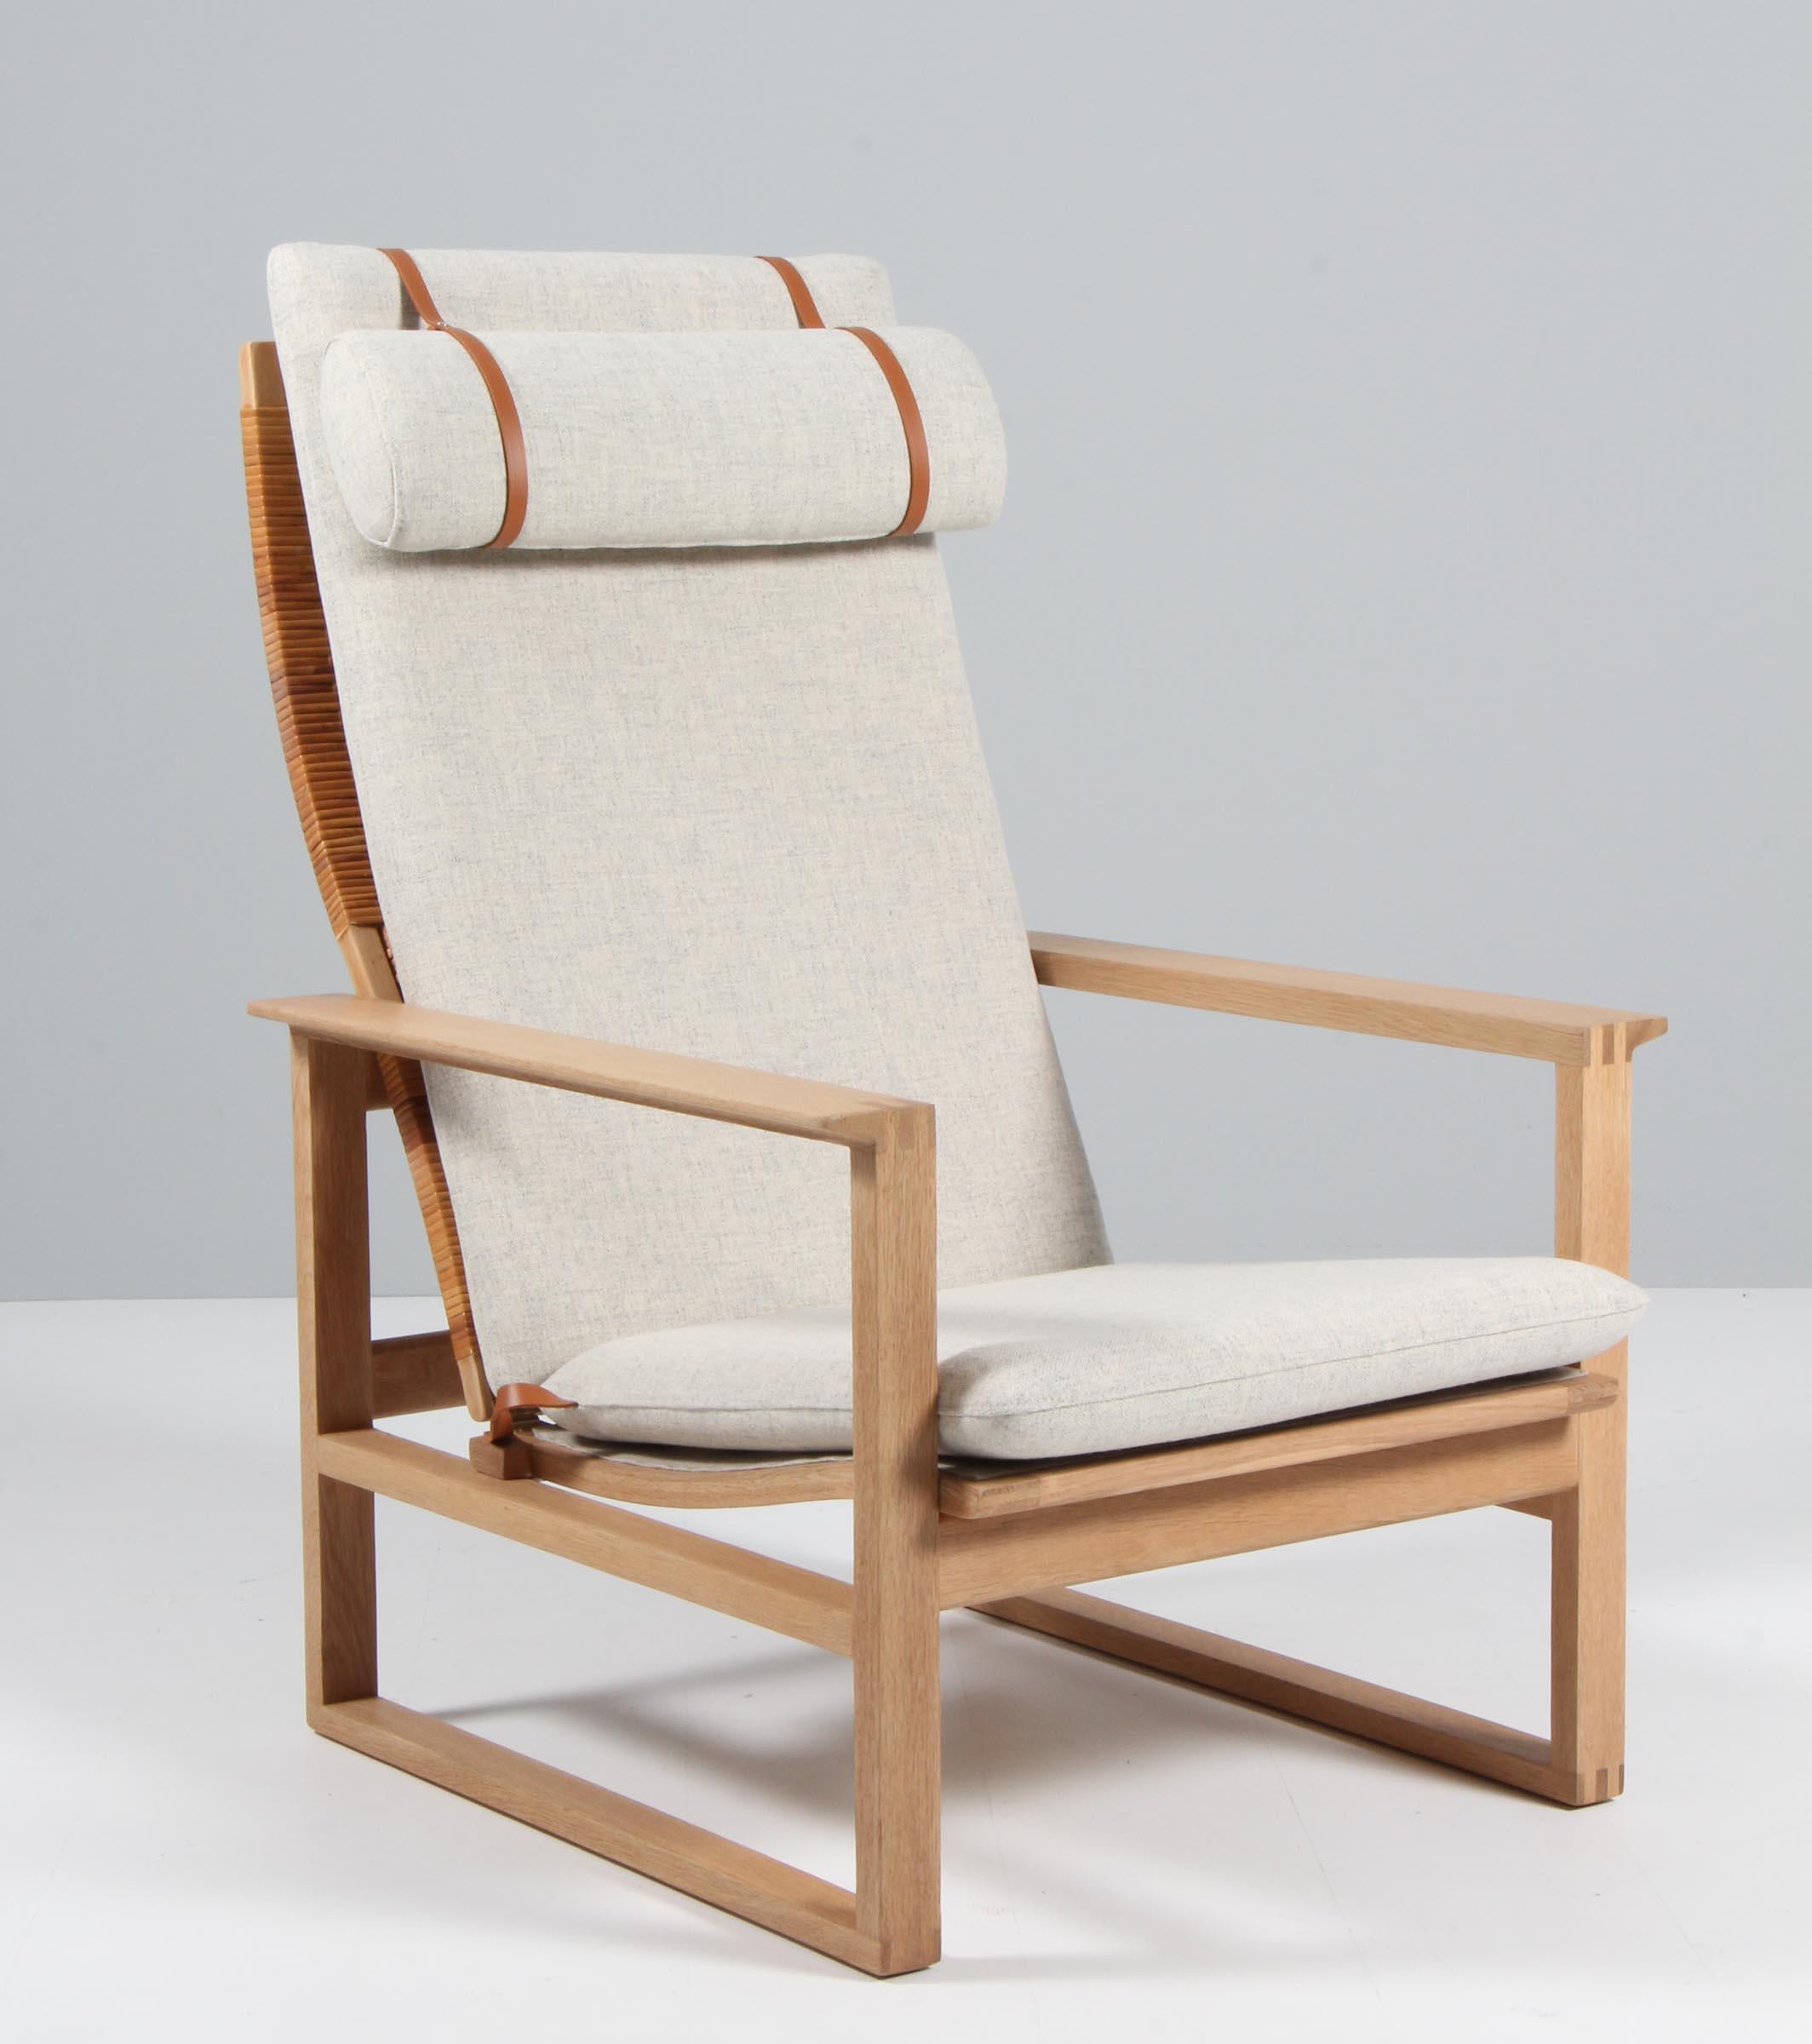 A Børge Mogensen lounge chair designed in 1956 model number 2254 for Fredericia Stolefabrik. Cubical frames made of solid oak with finger joints and cane. This high back model 2254 also reclines.

New upholstered in Kvadrat Tonus 2 11, the chair